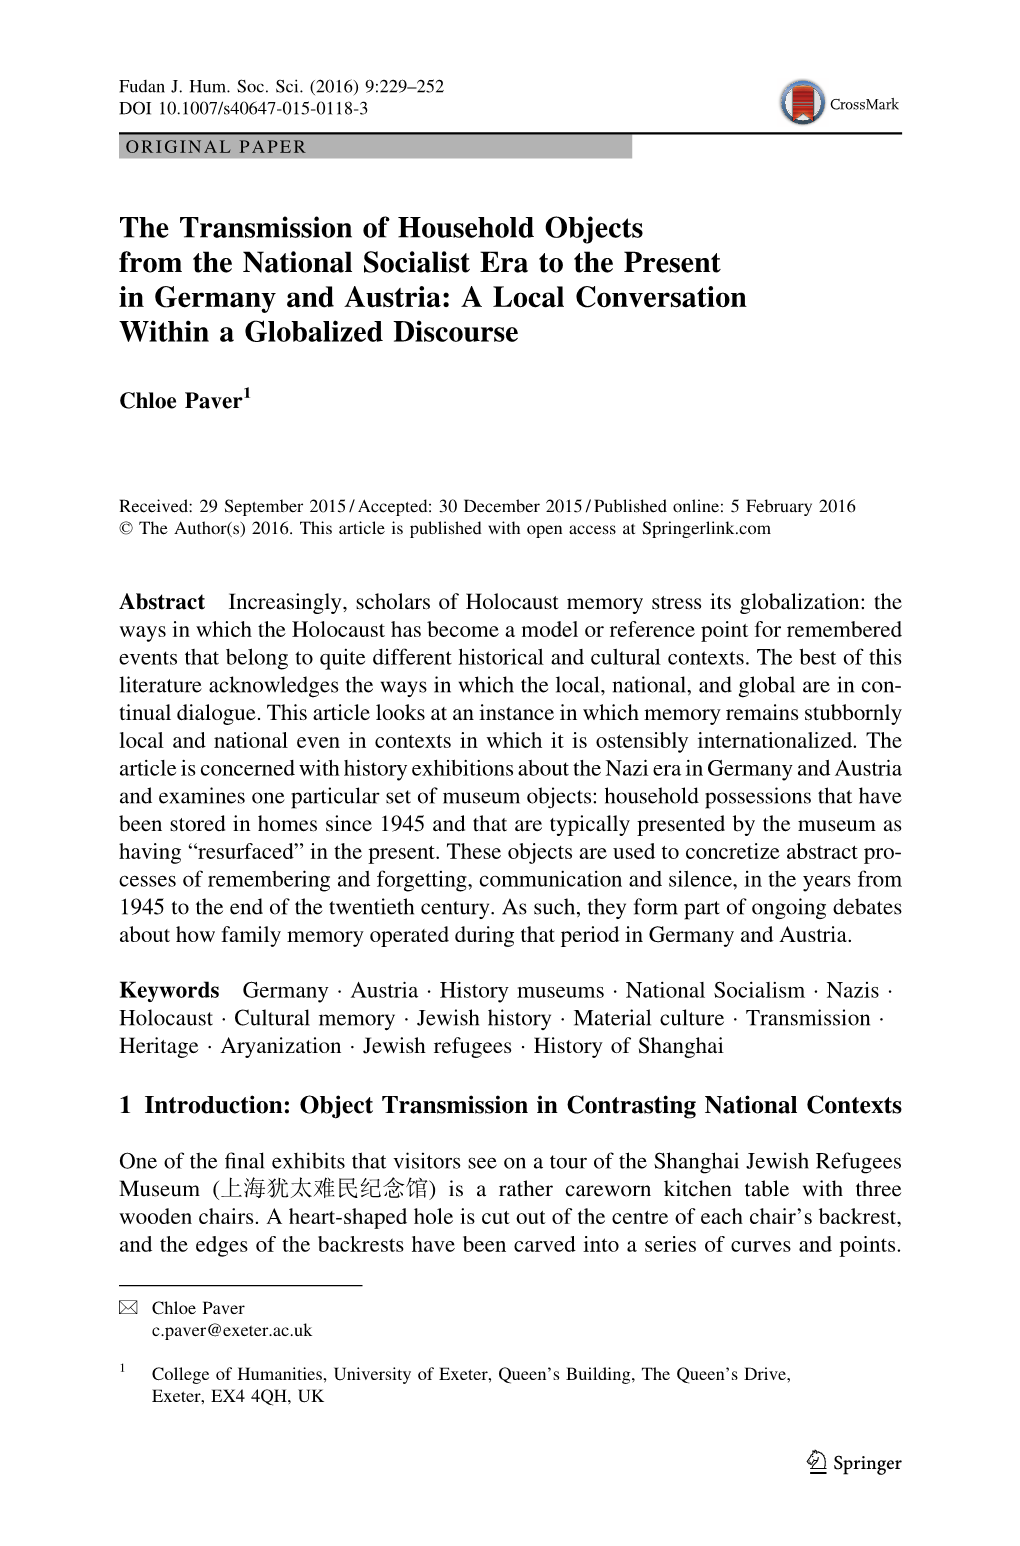 The Transmission of Household Objects from the National Socialist Era to the Present in Germany and Austria: a Local Conversation Within a Globalized Discourse